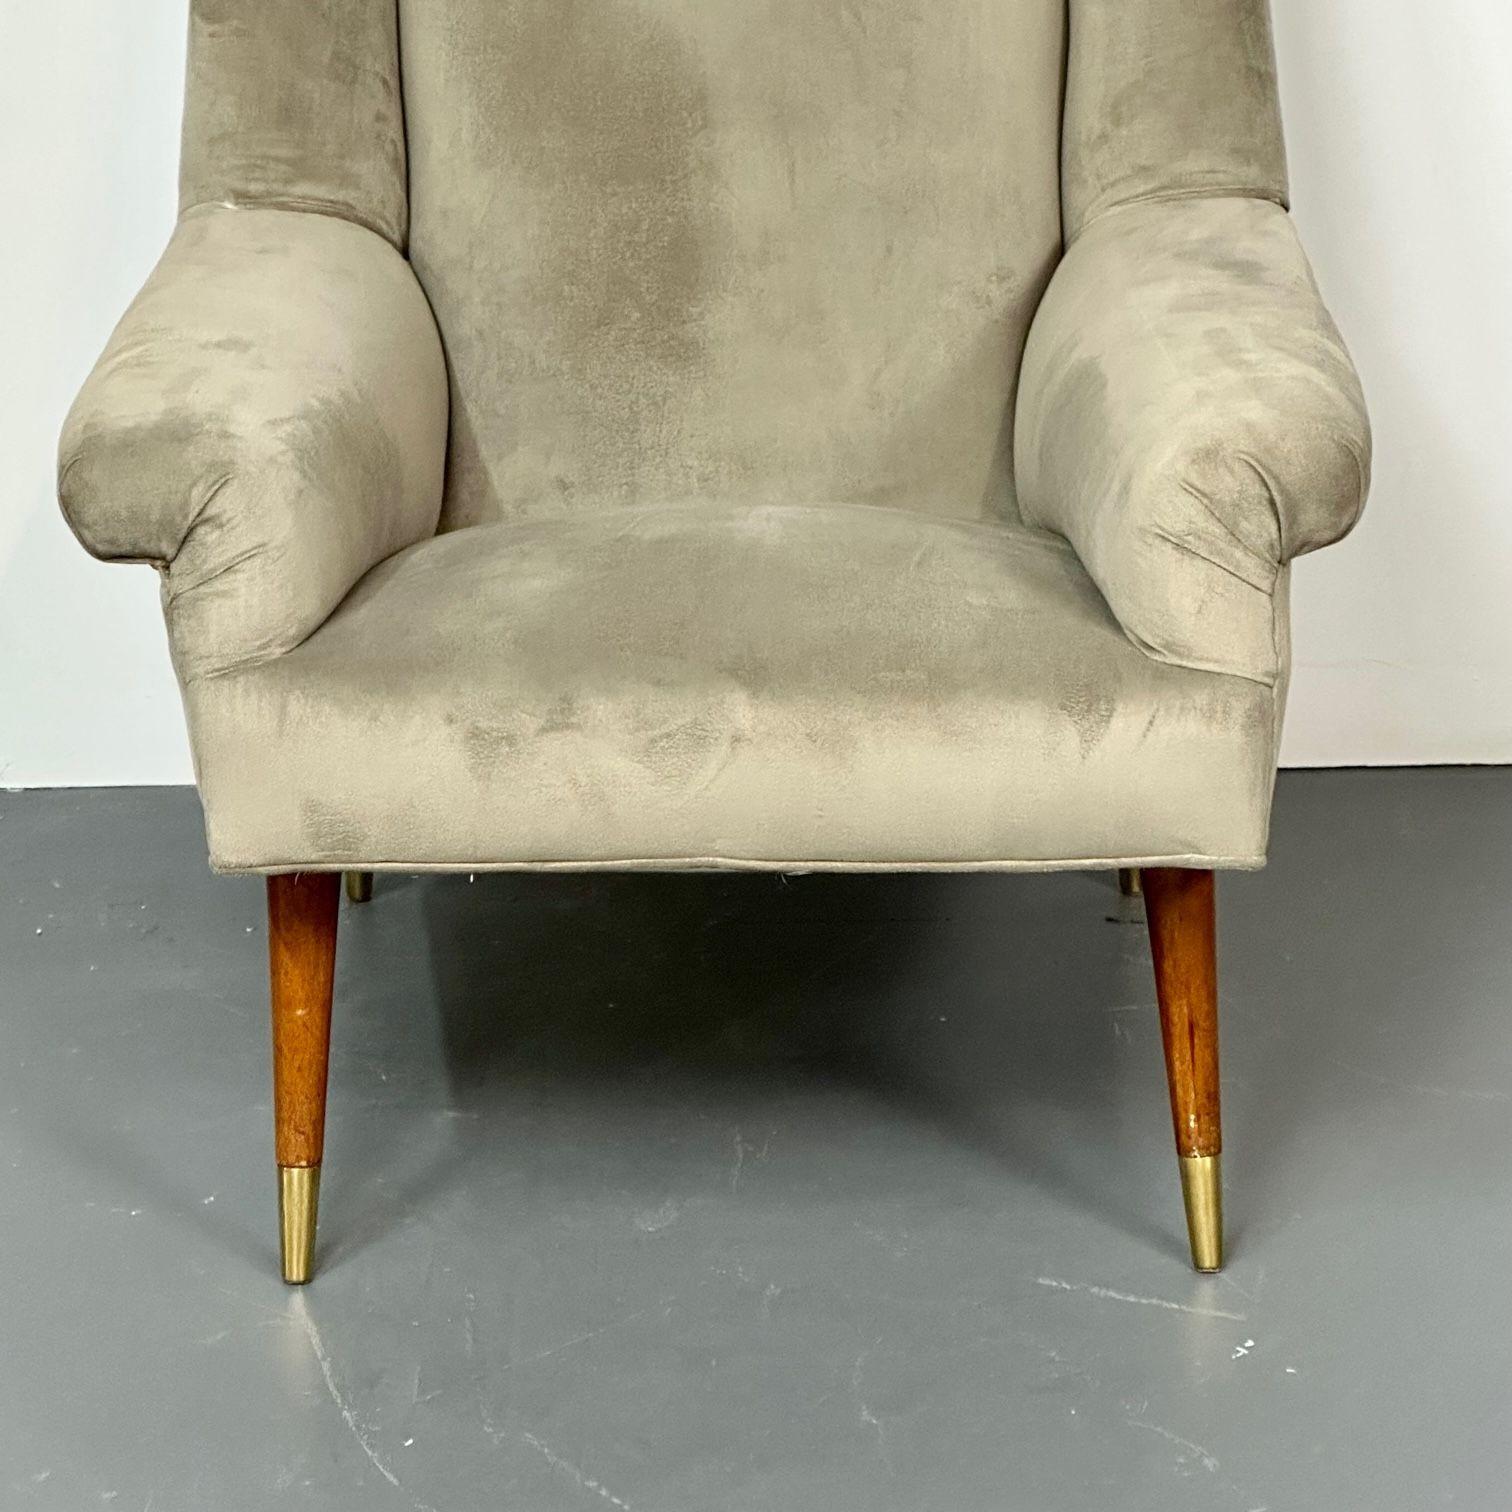 Gio Ponti Style, Mid-Century Modern, Wingback Chairs, Grey Velvet, Wood, 1950s For Sale 3